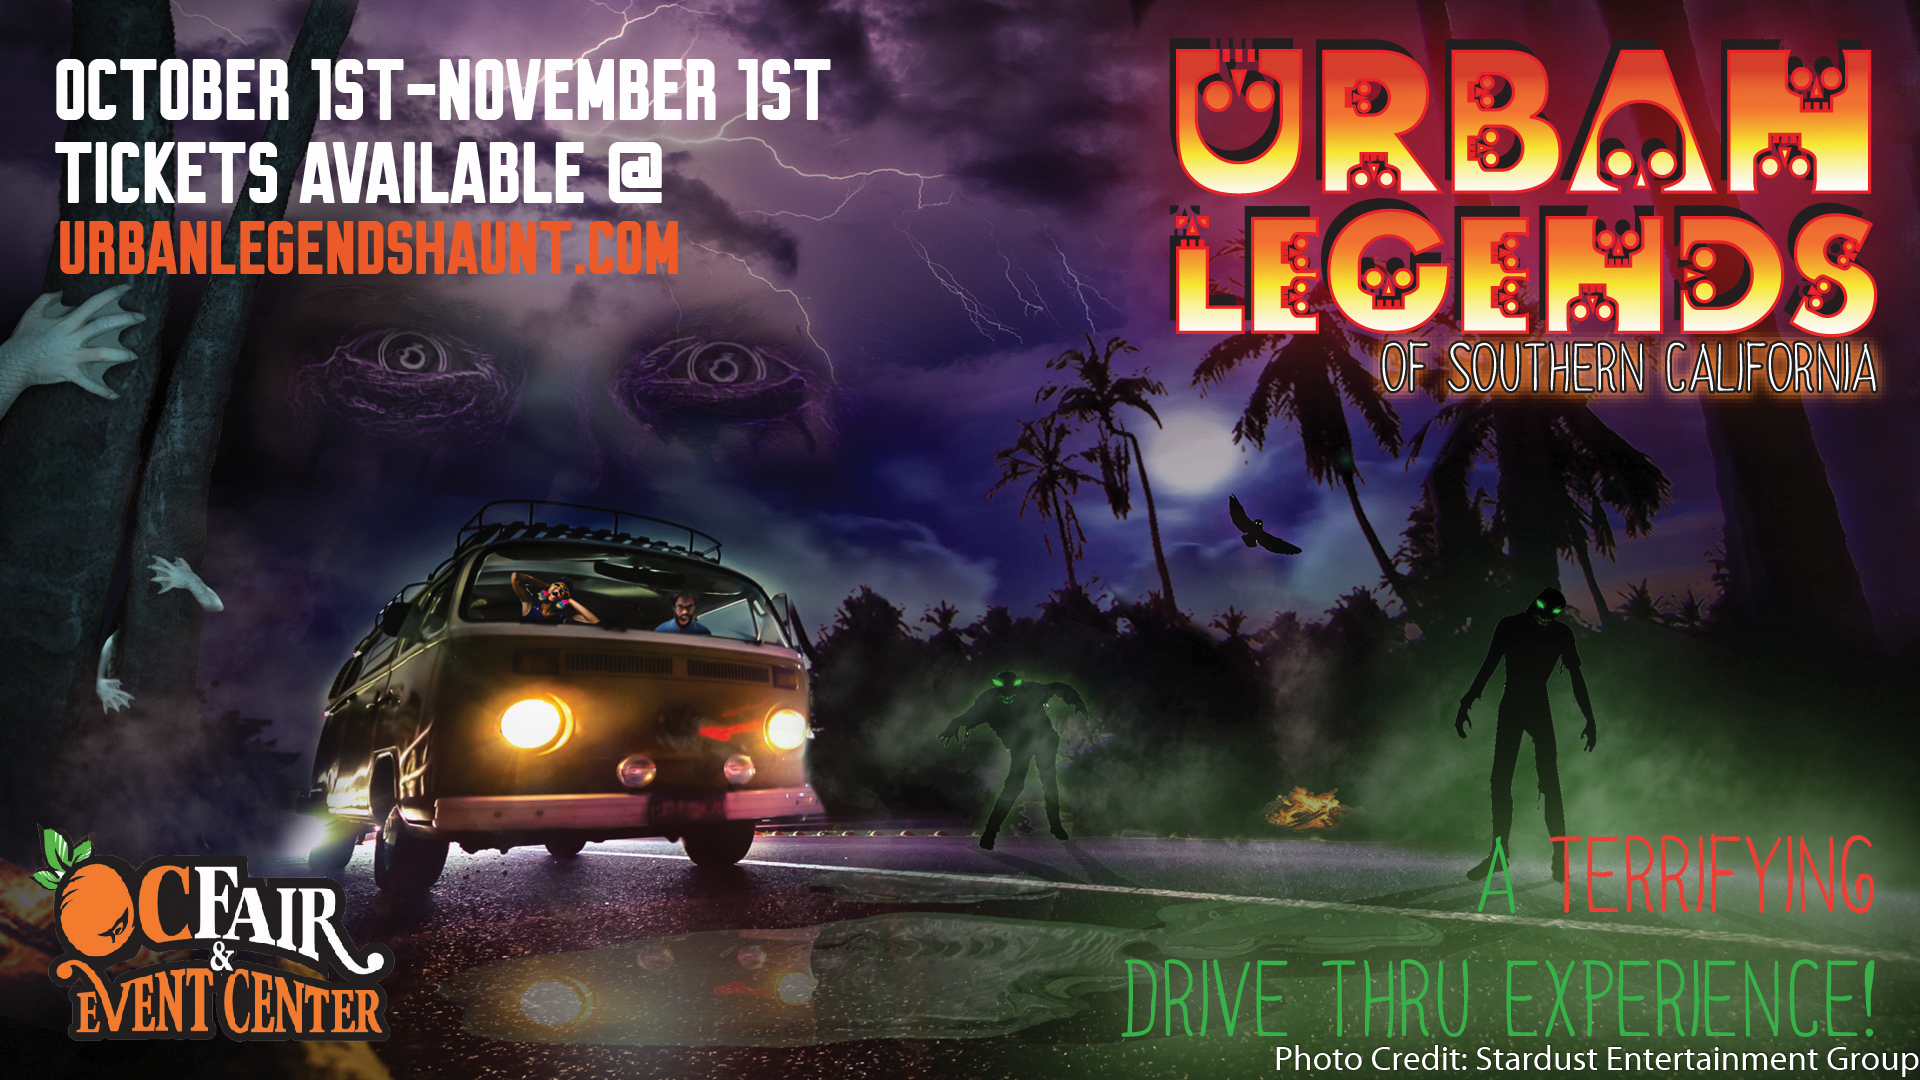 Urban Legends of Southern California is coming to OC Fair